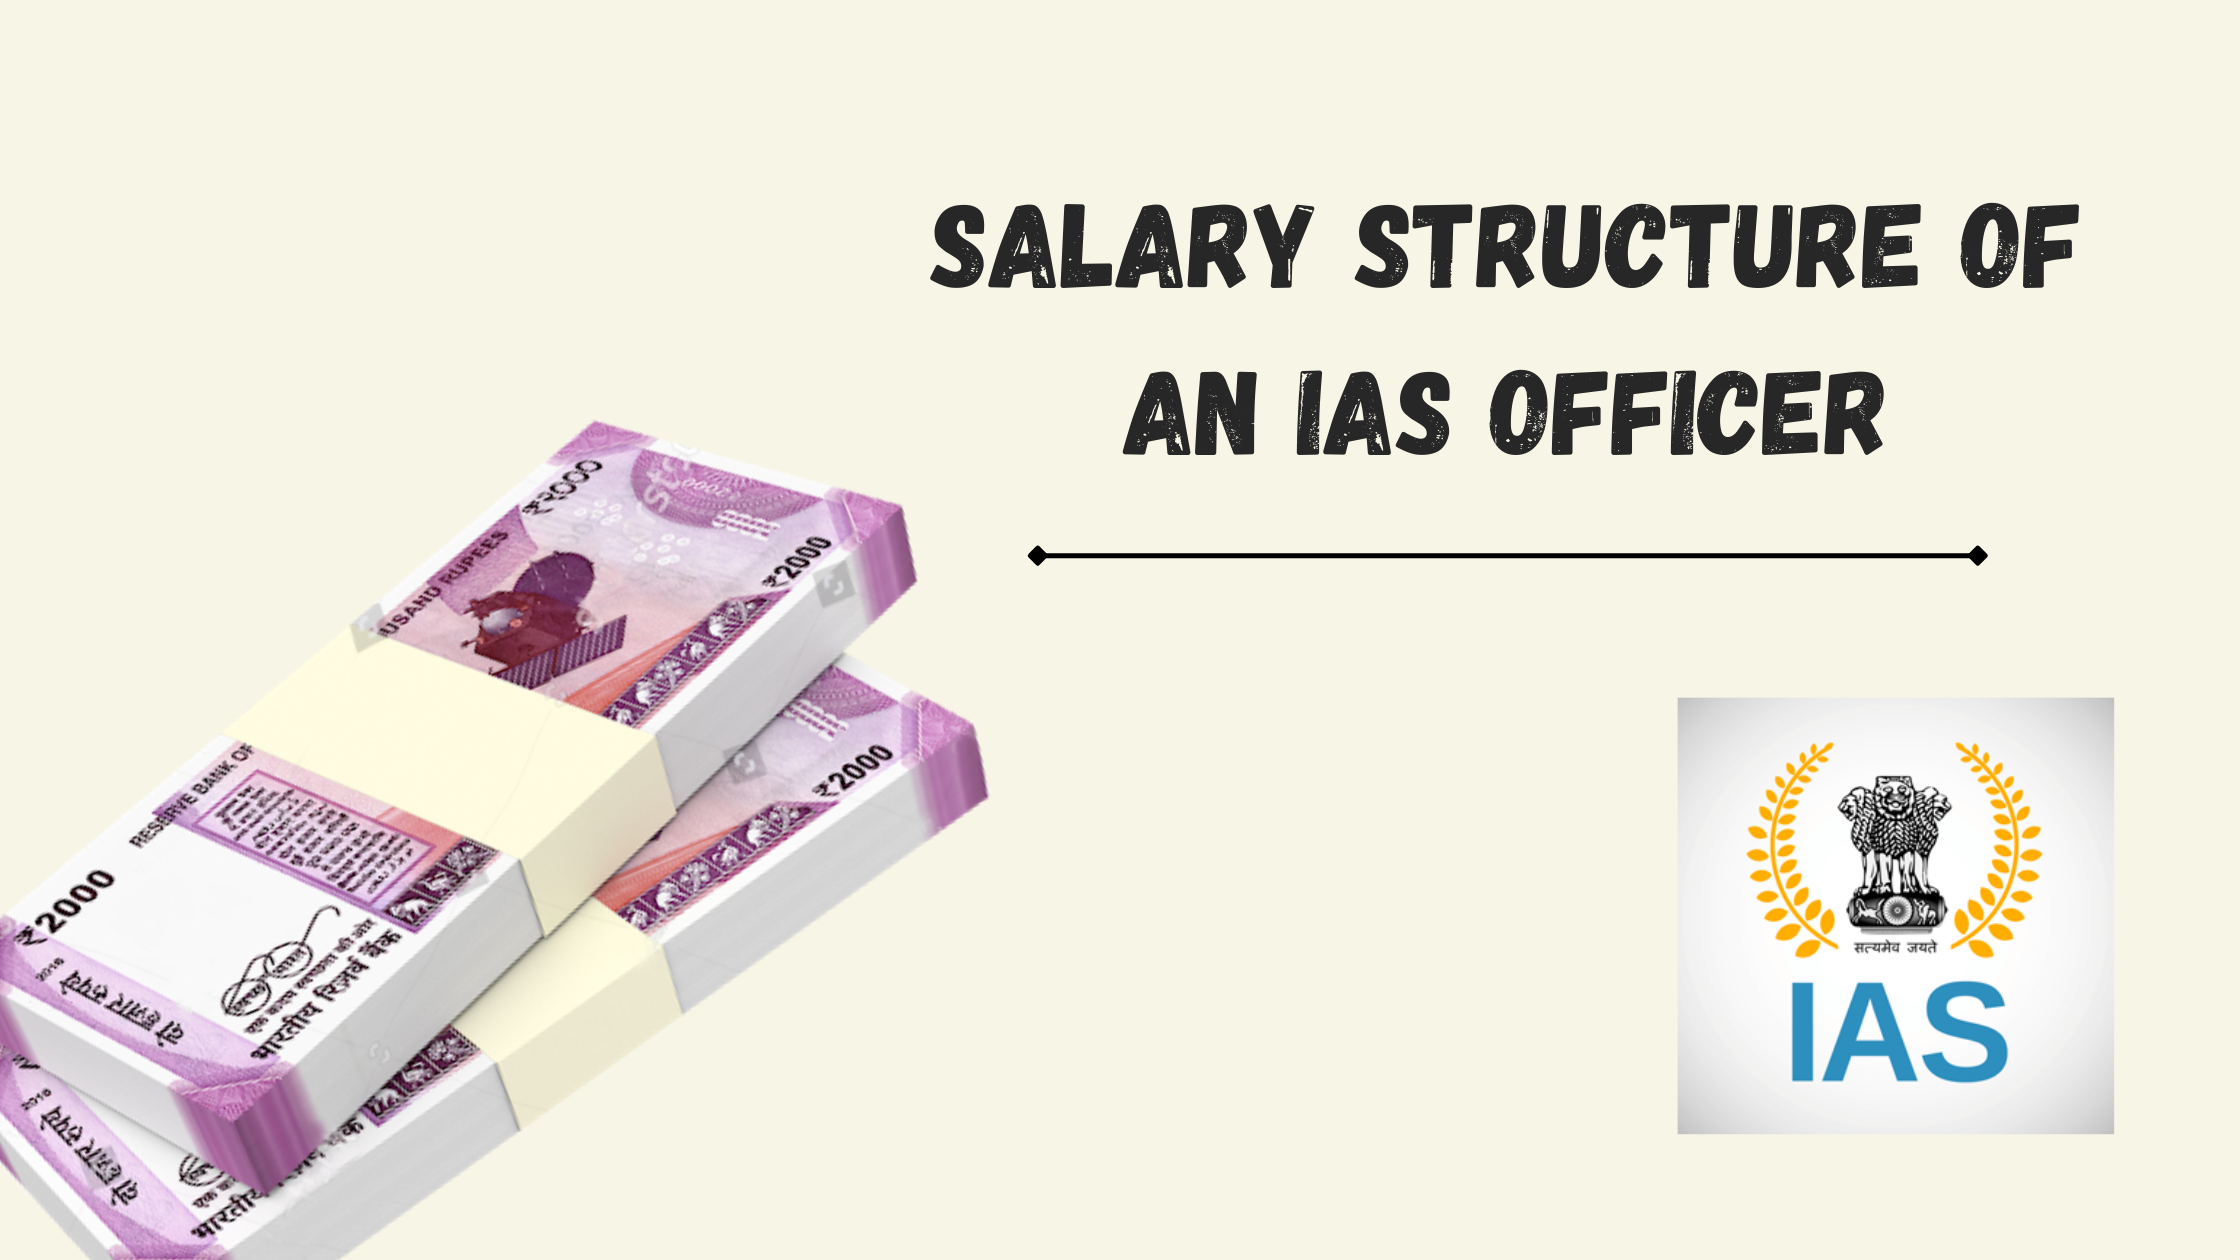 Indian Administrative Service (IAS) Officer being one of the prestigious careers in India, many are curious about Salary structure of an IAS